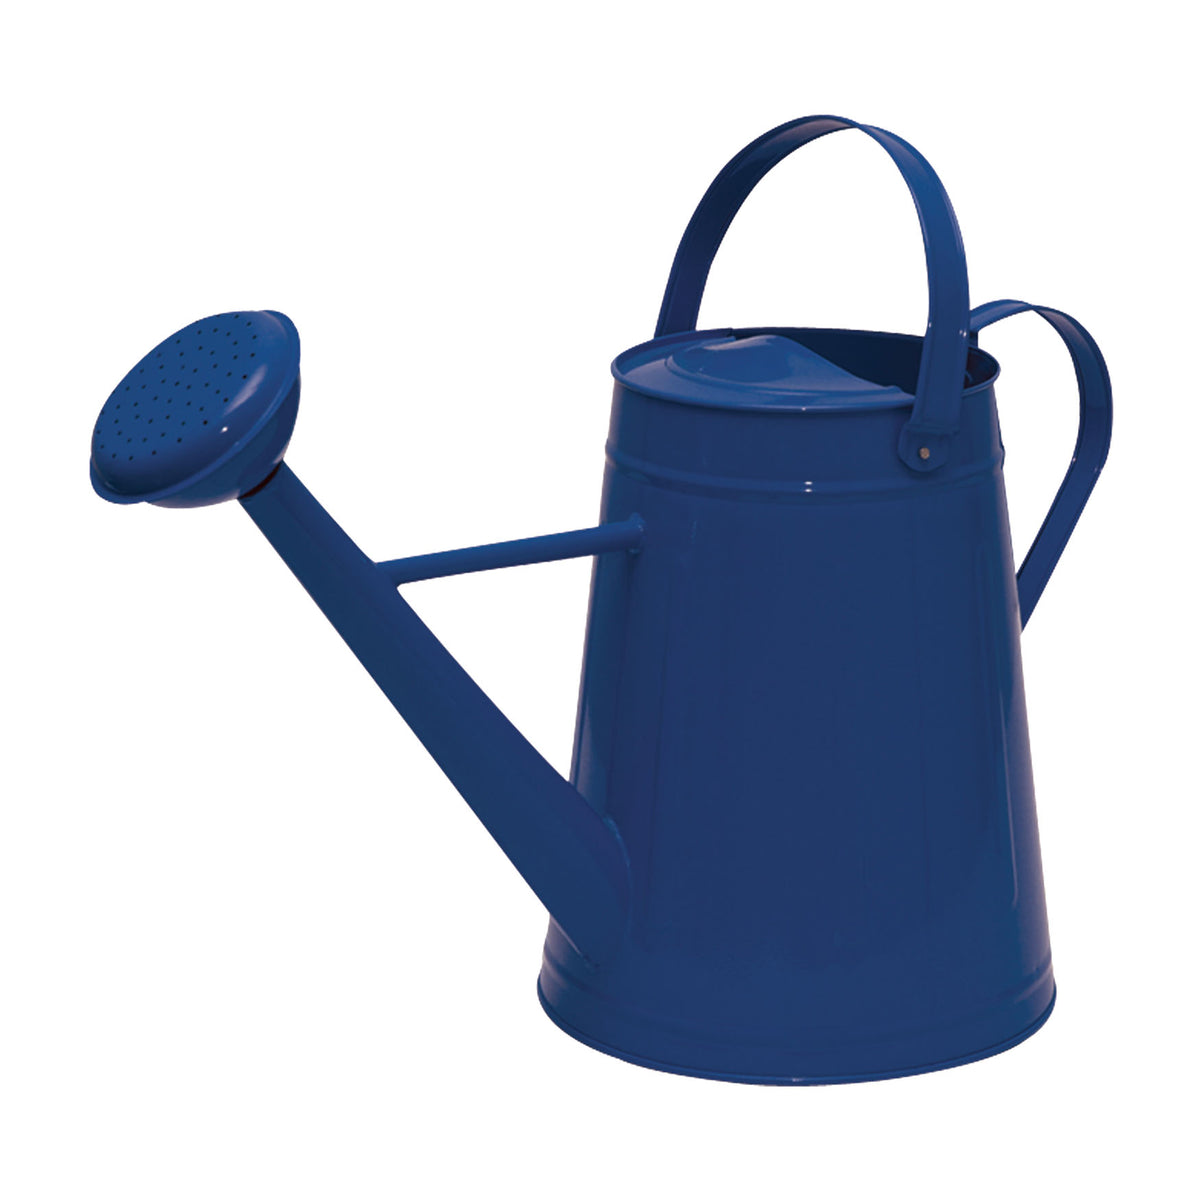 Blue 1.2 gallon metal watering can.  Constructed with powder coated galvanized steel. 18&quot;L x 7.5&quot;W x 13&quot;H 1.5lbs.